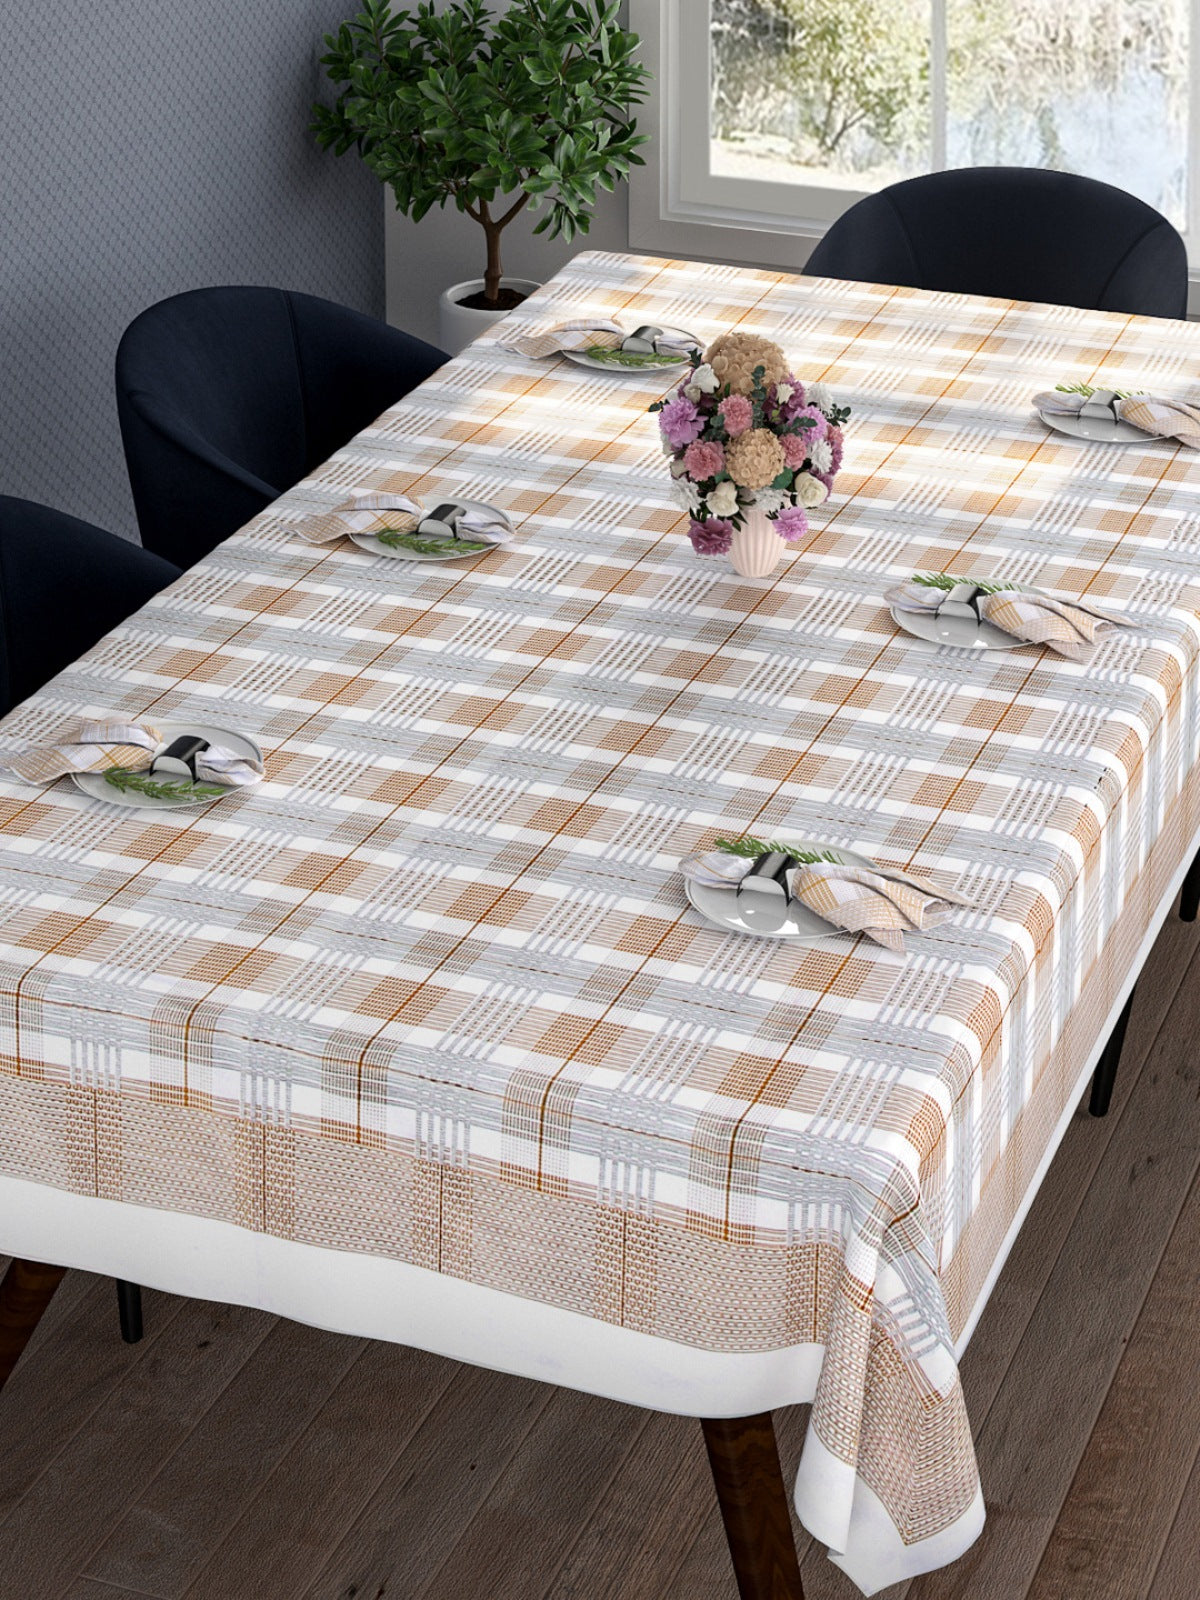 Checked Printed 9 Dining Table Cover 6 Seater With Napkin